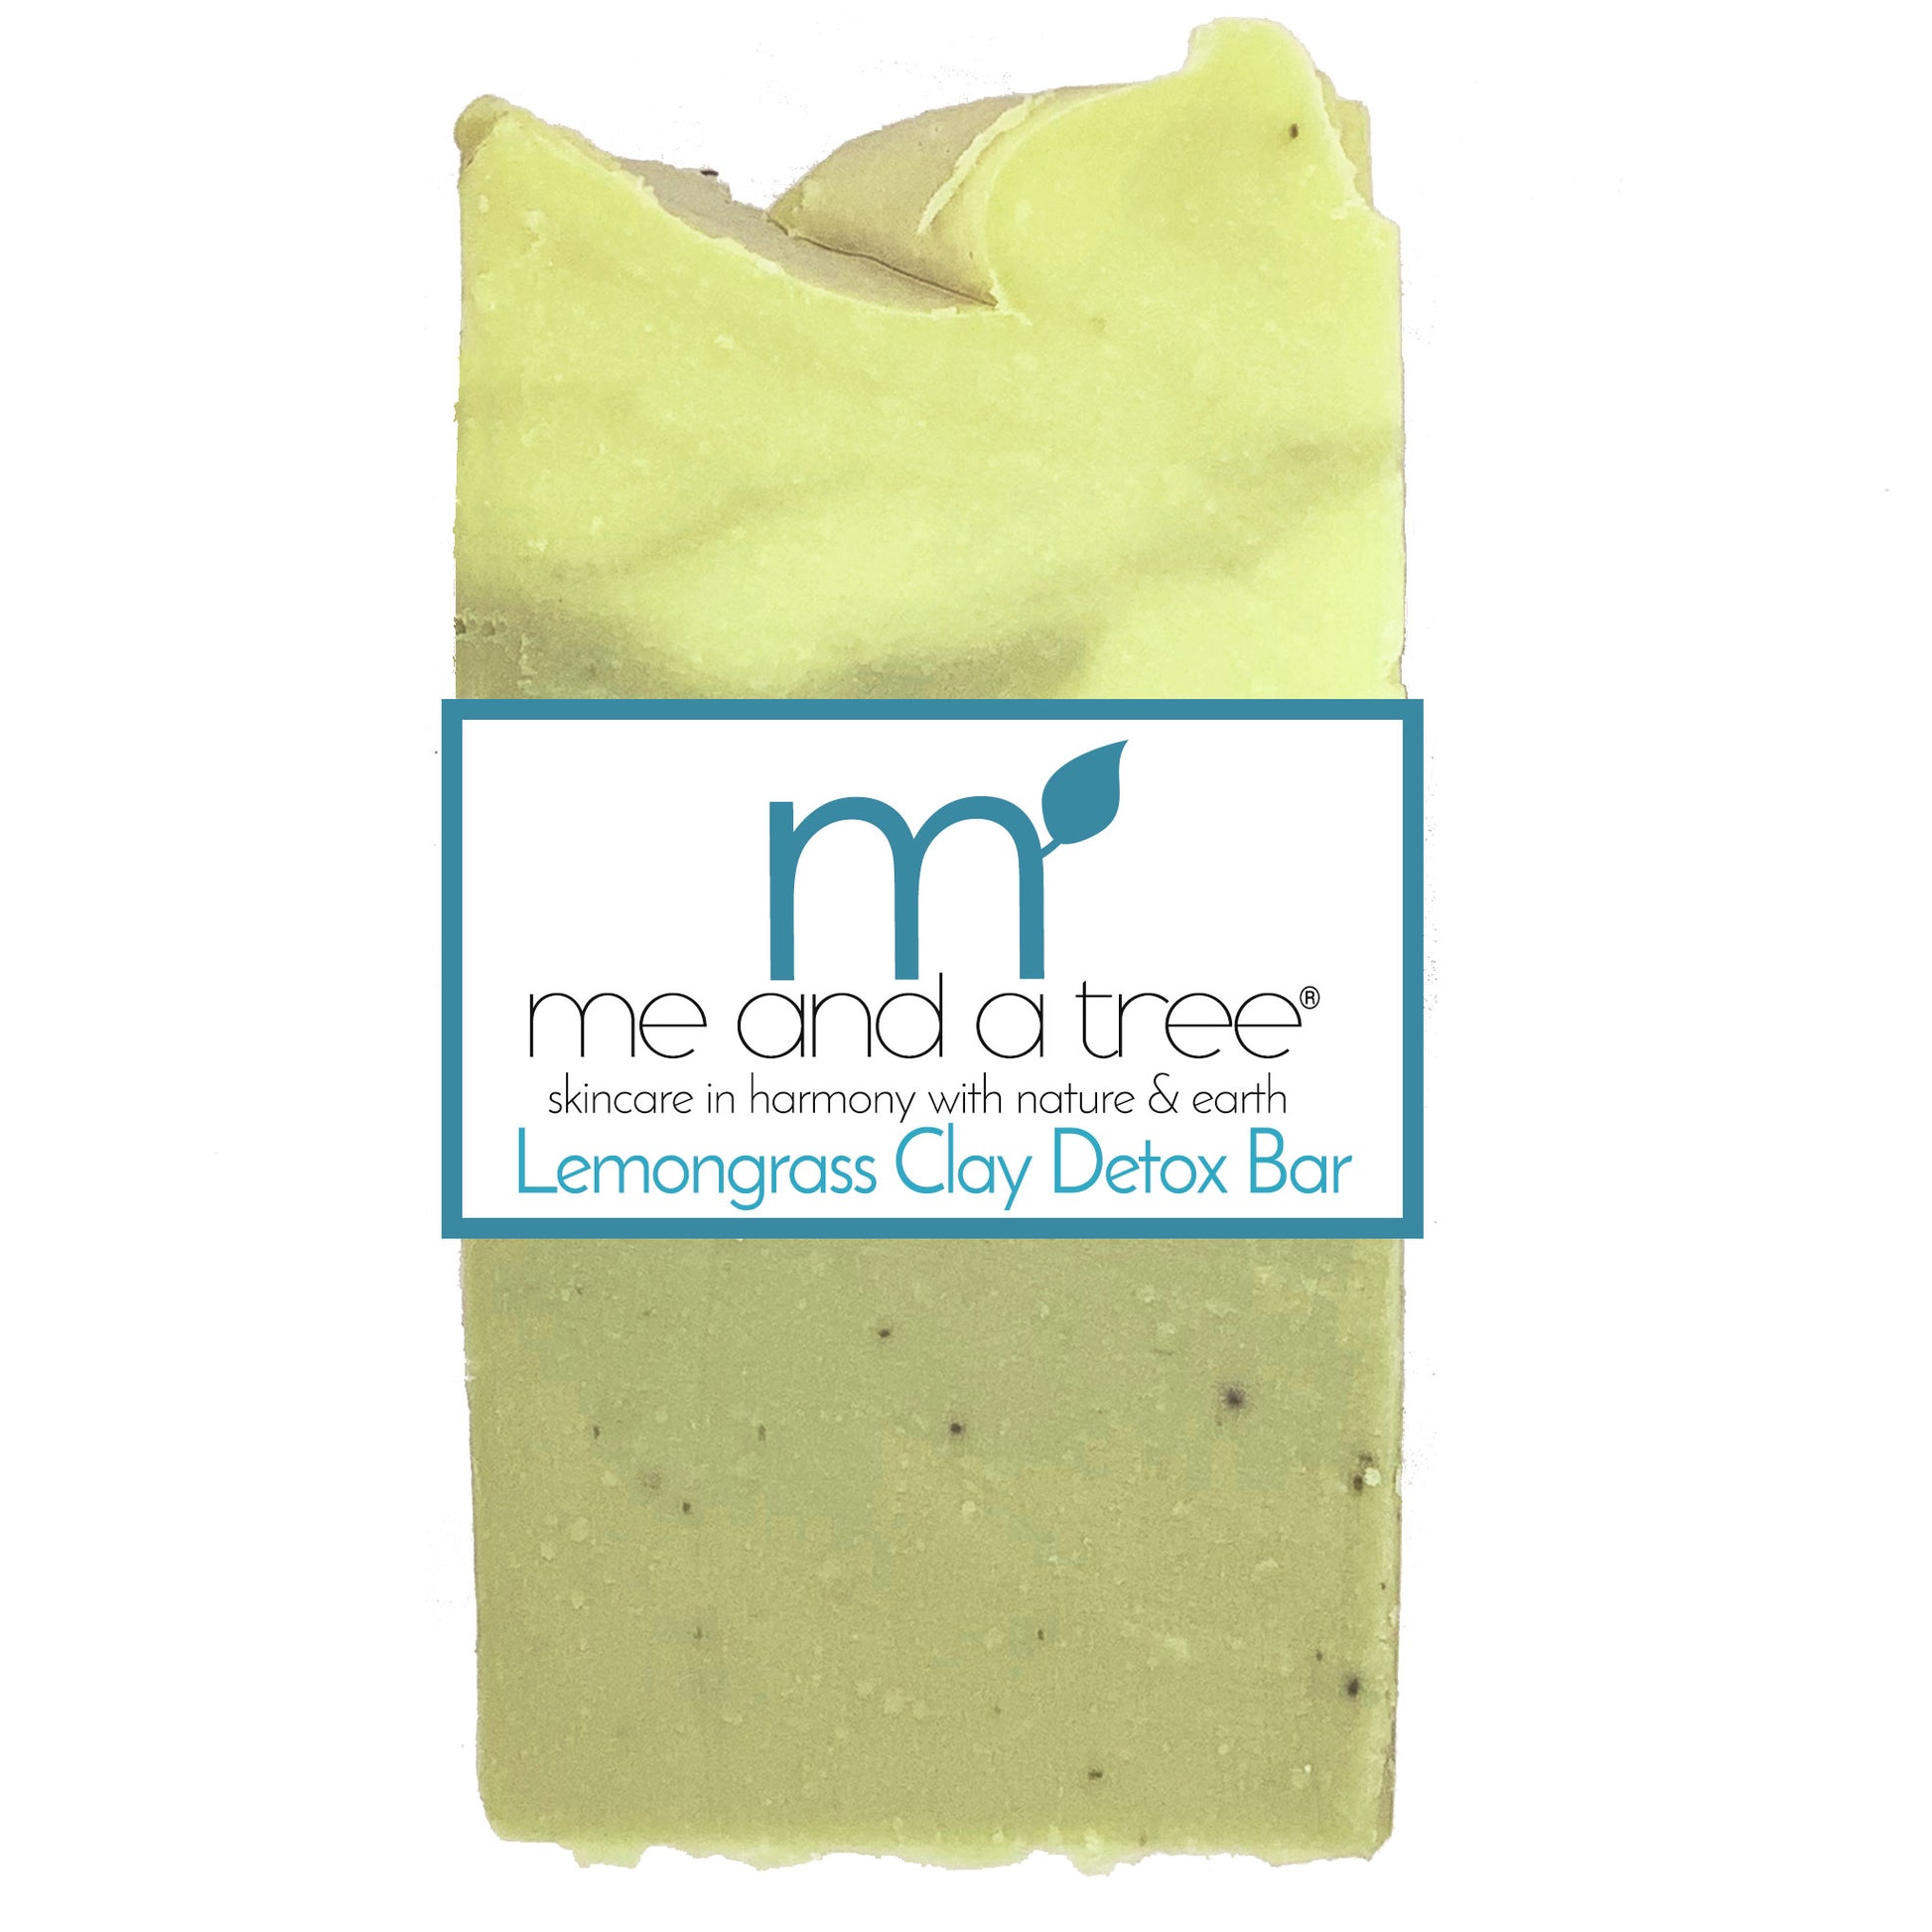 Image of Lemongrass French Clay Bar Soap with natural vegan ingredients, including lemongrass extract, French green clay, cold-pressed olive oil, and unrefined Grade-A Shea